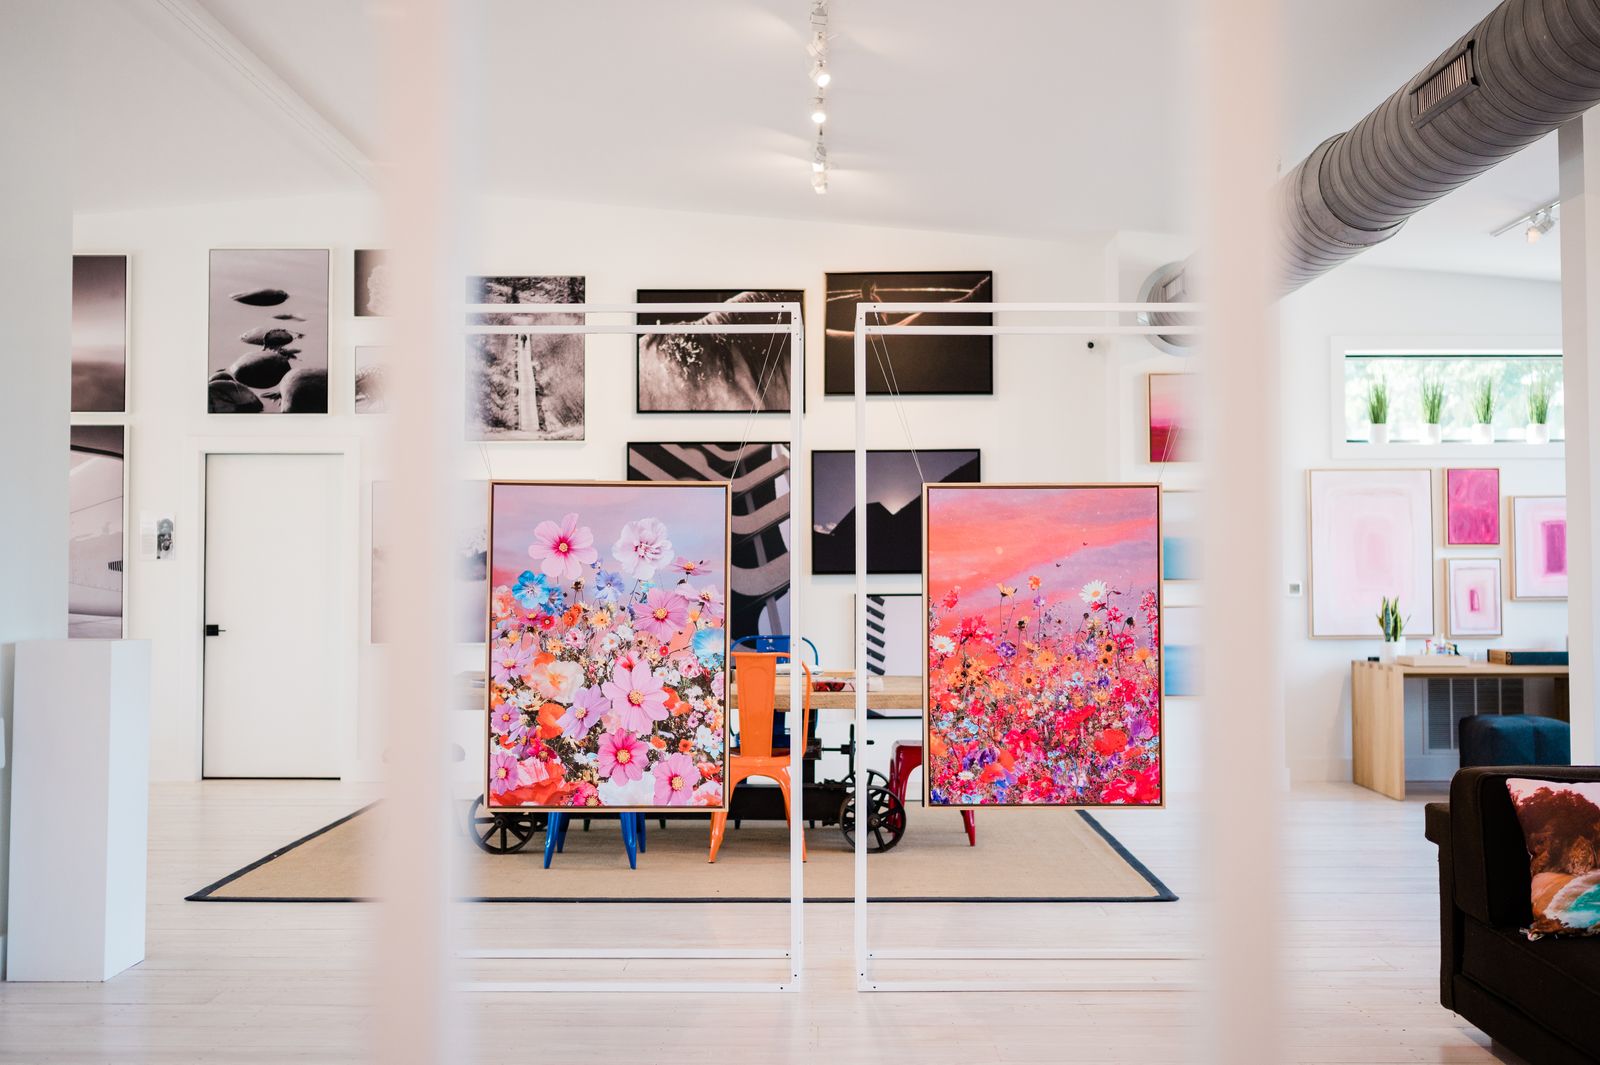 Splashworks, one of the HPxD flagships, hosts artists from all over the world in their galleries in addition to their textiles and home furnishings.